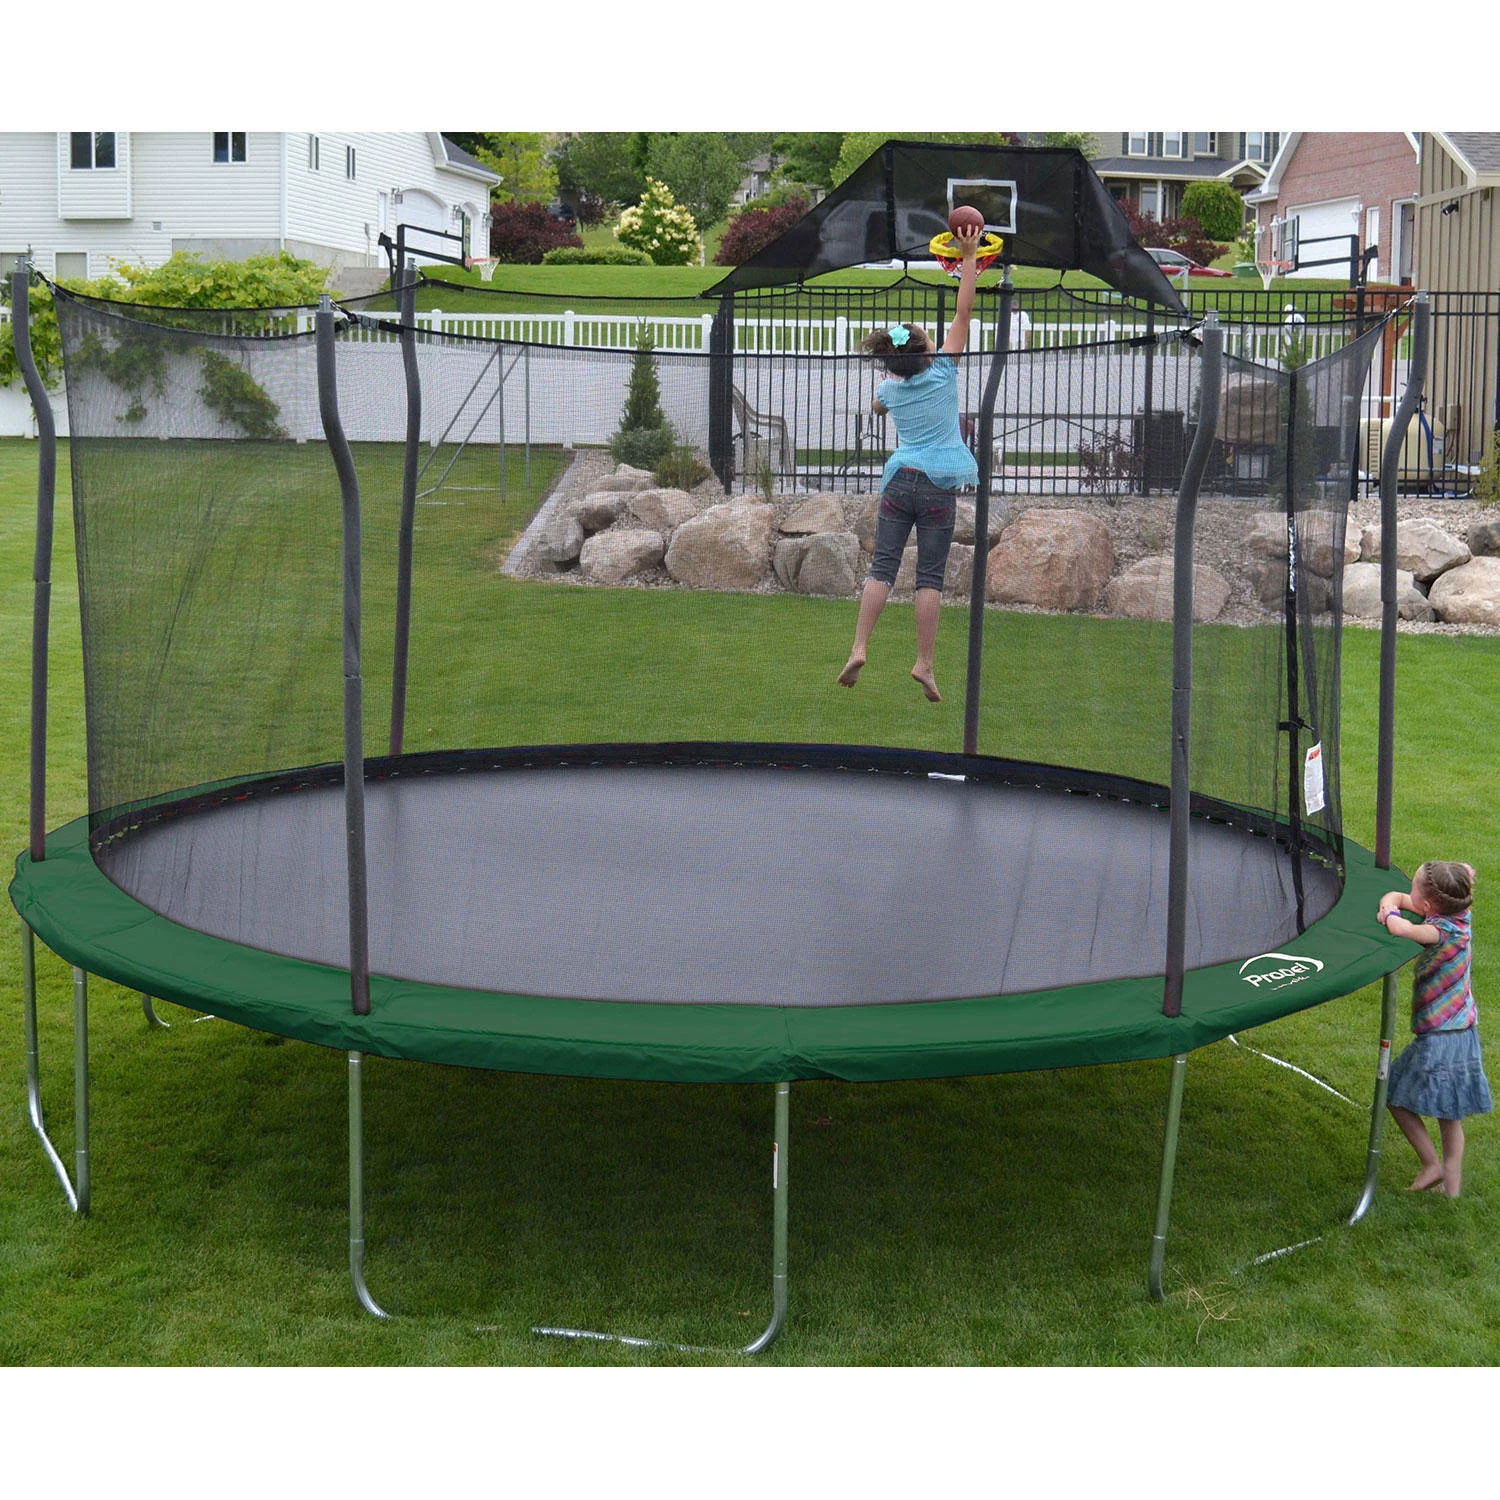 Propel Trampolines 15′ Round Trampoline with Safety Enclosure